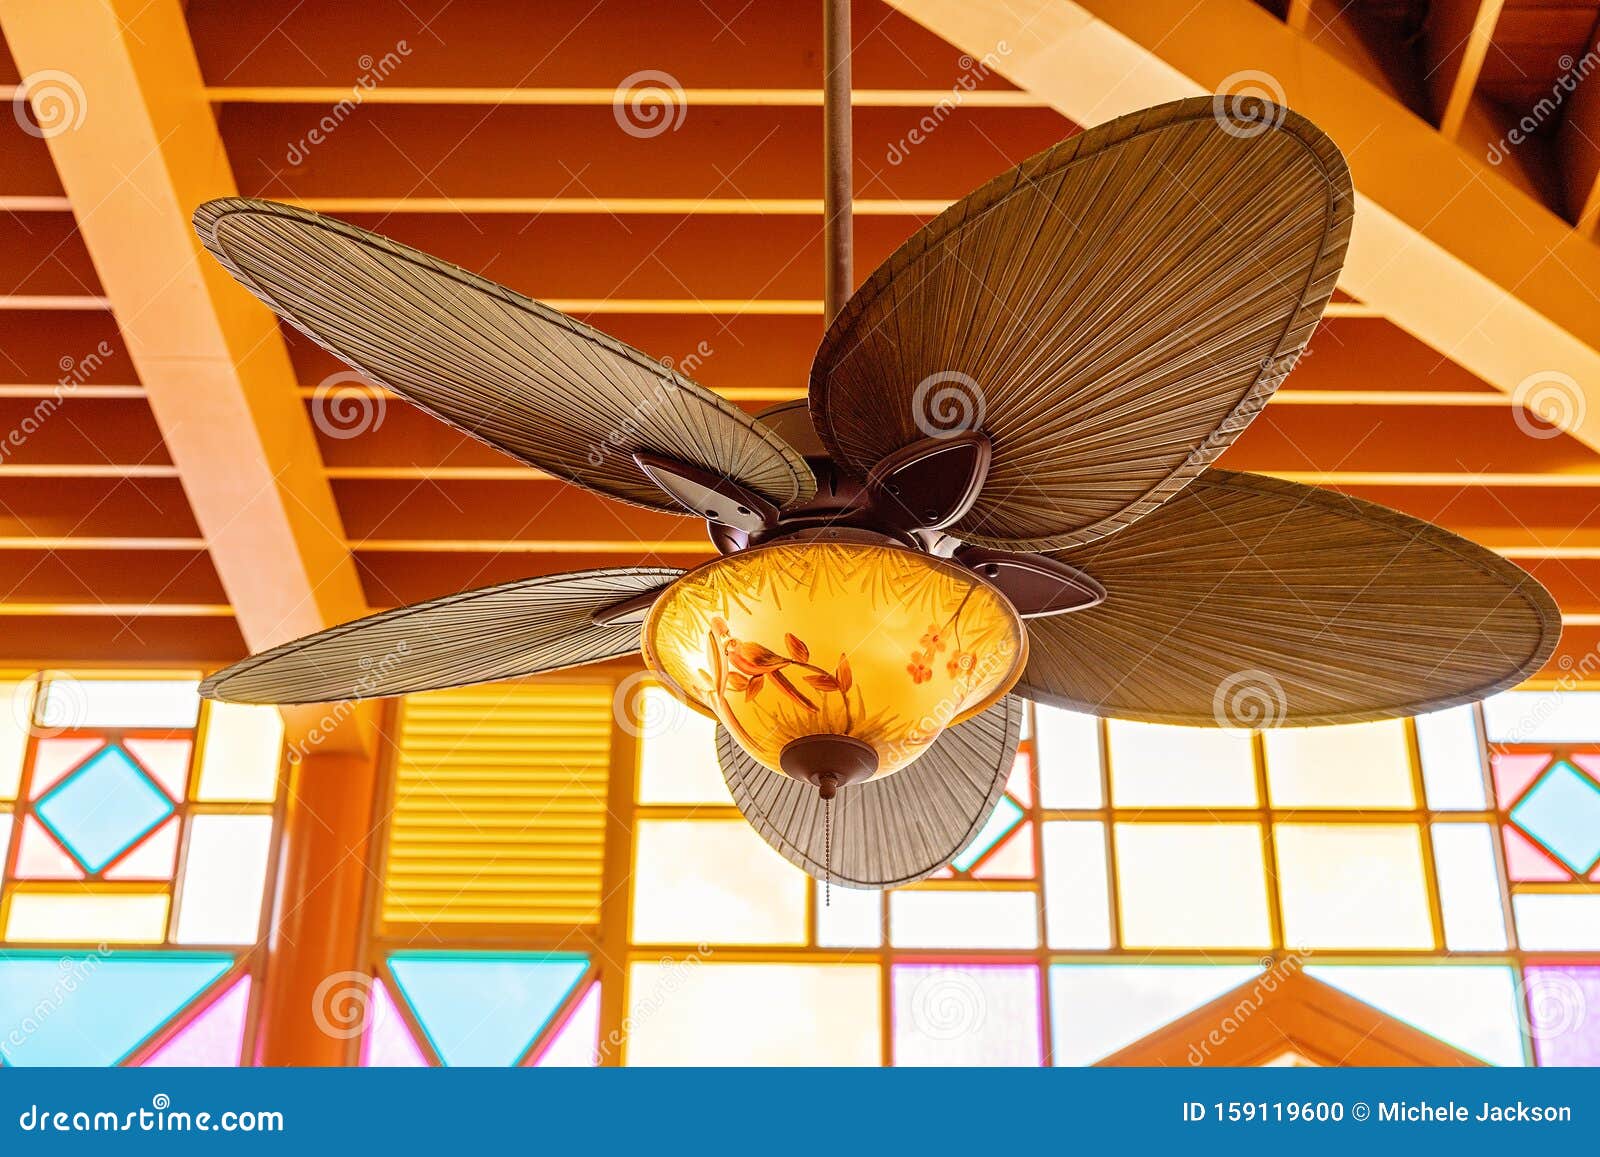 An Art Deco Fan Against Brightly Lit Lead Light Windows Stock Photo Image Of Exotic